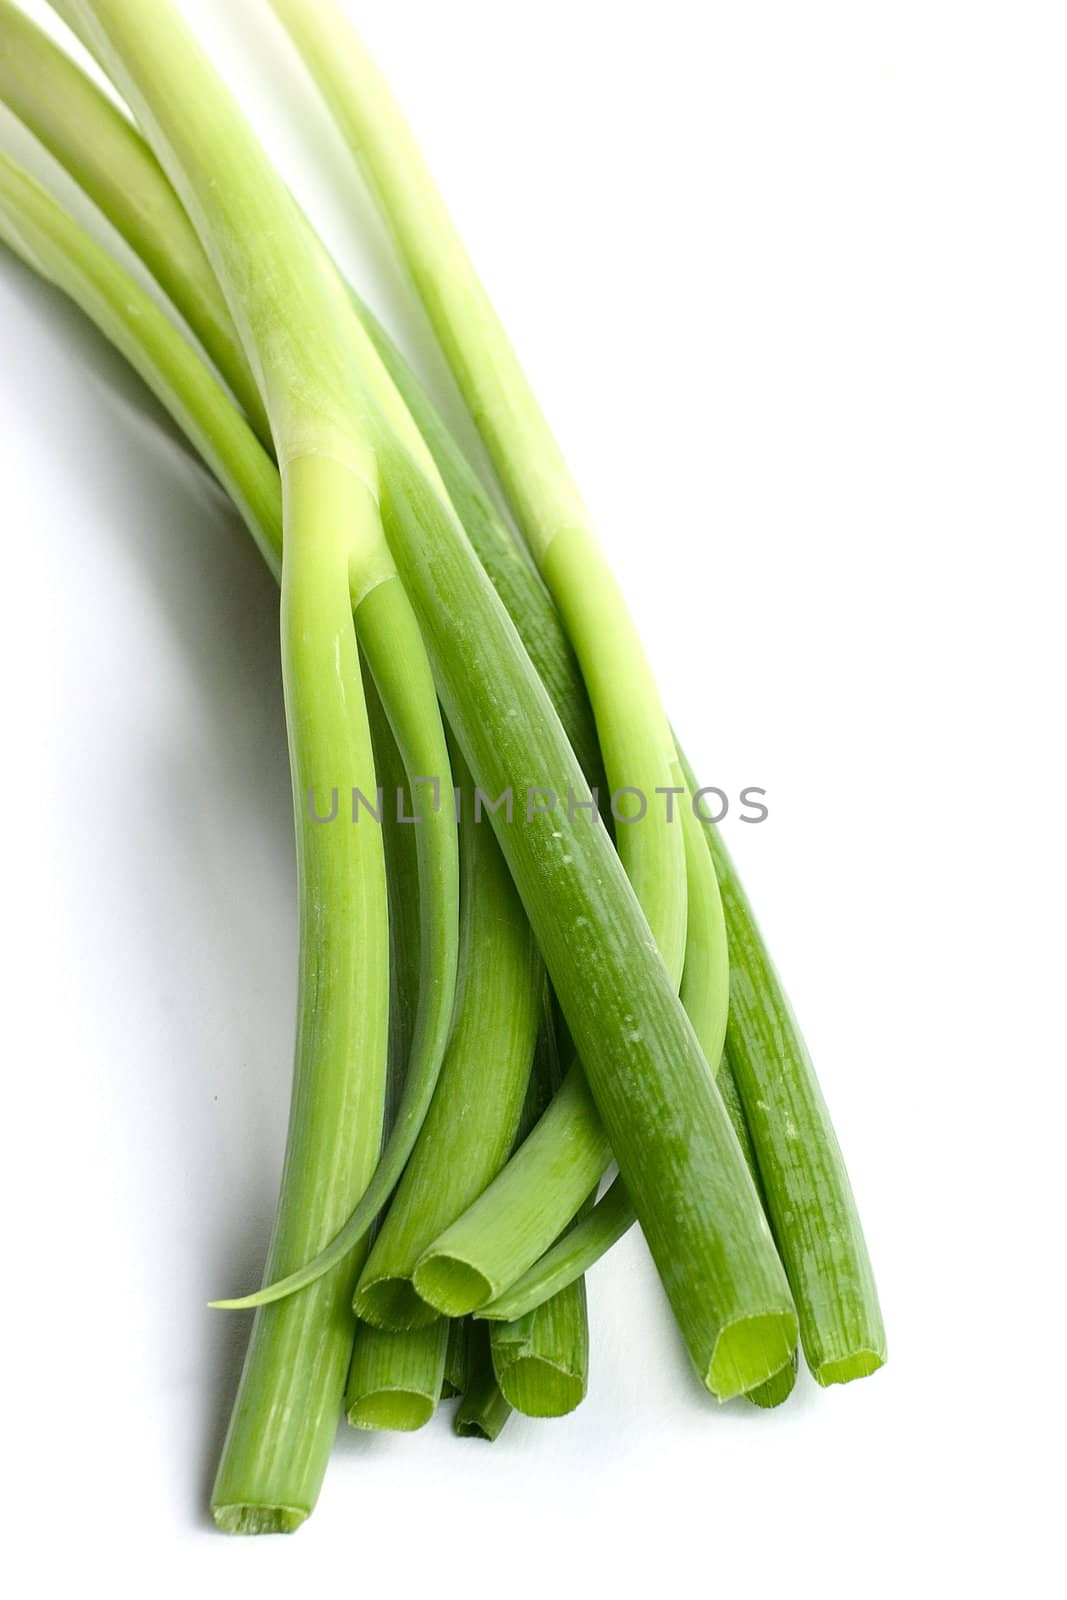 Chive in bunch isolated on white background